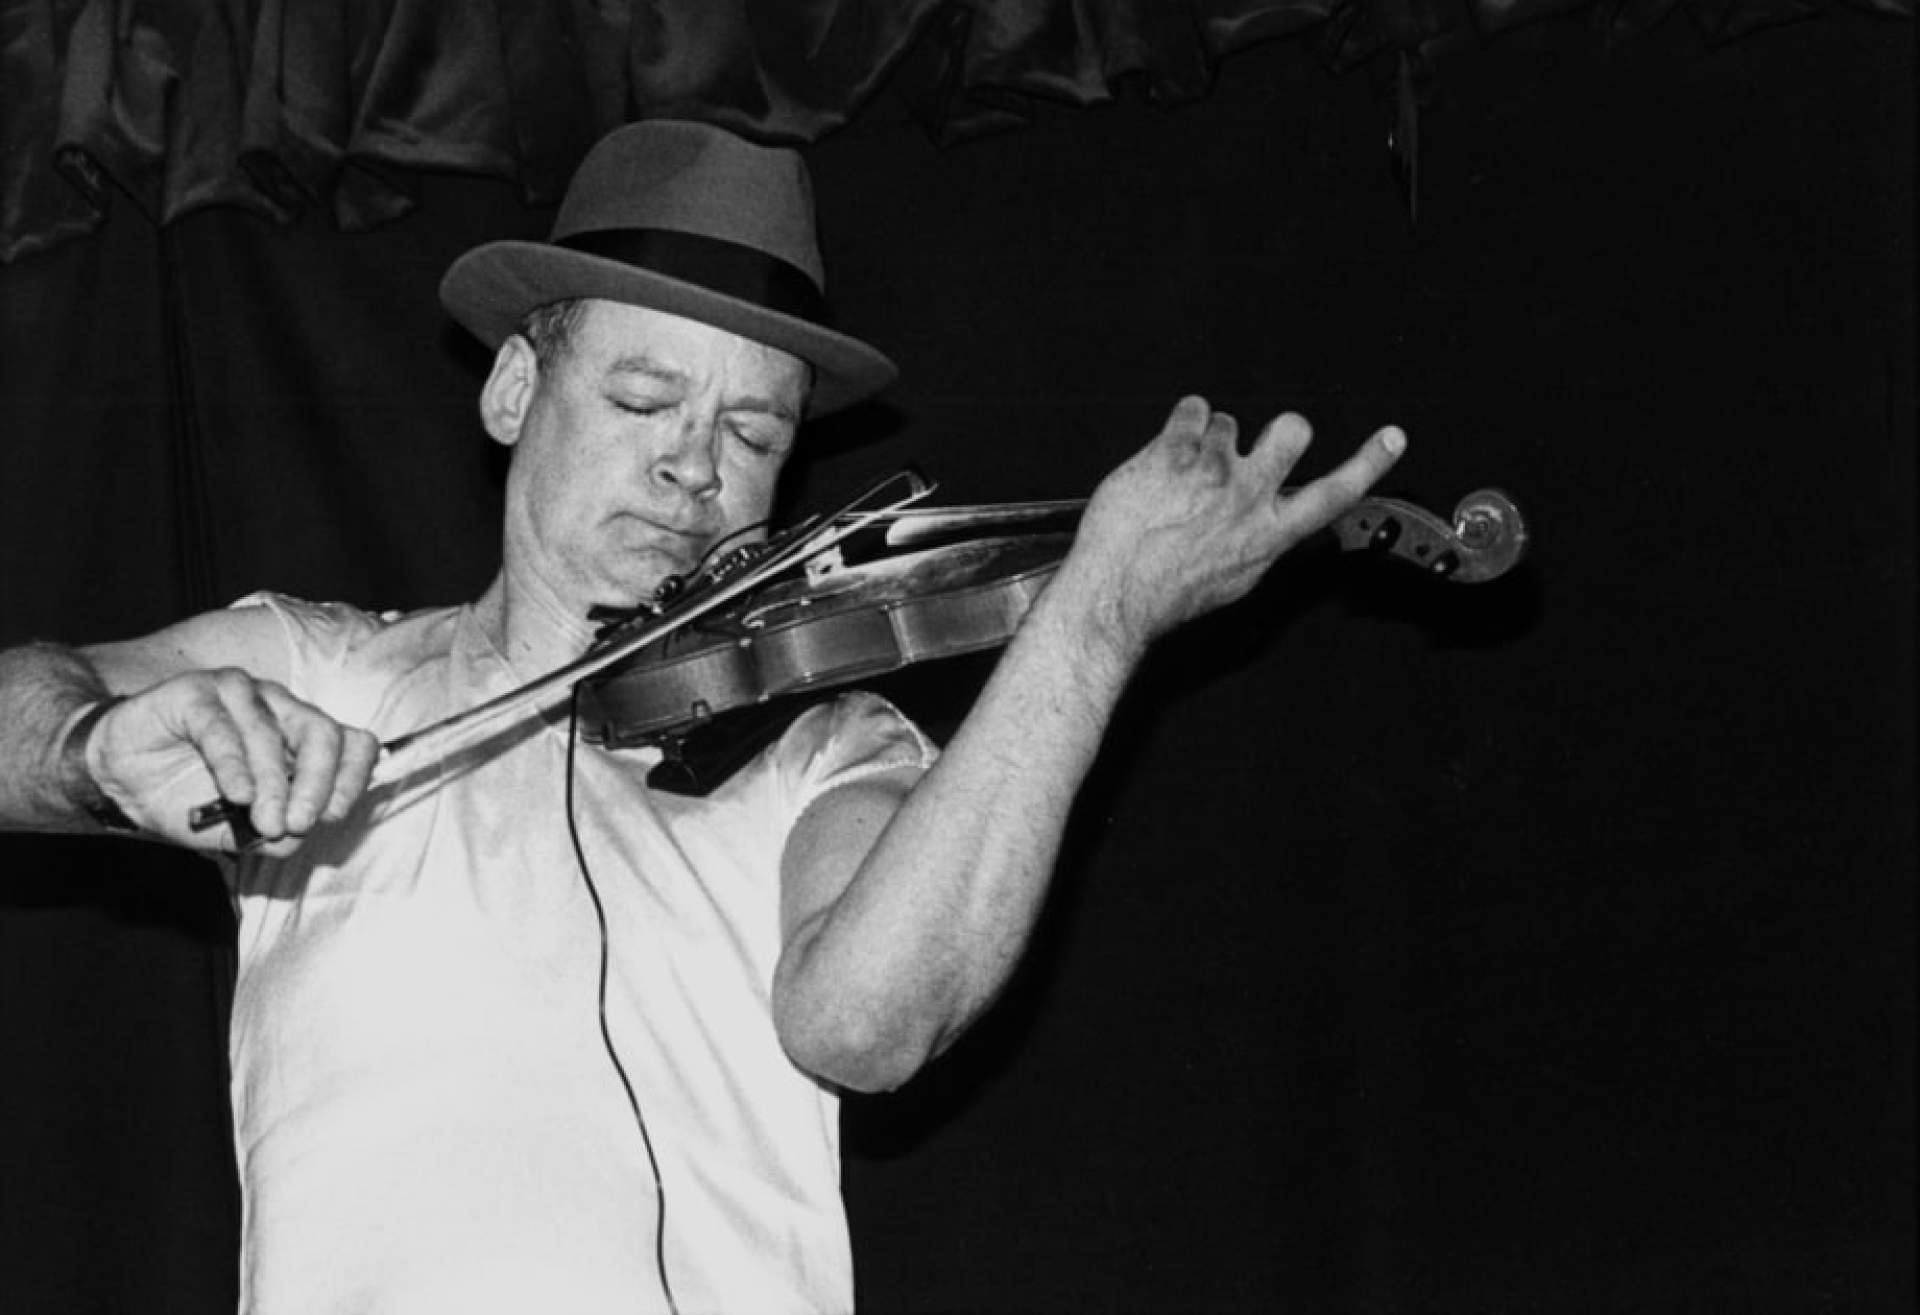 The Last Detail: Tony Conrad's Amplified Drone Strings (2016)